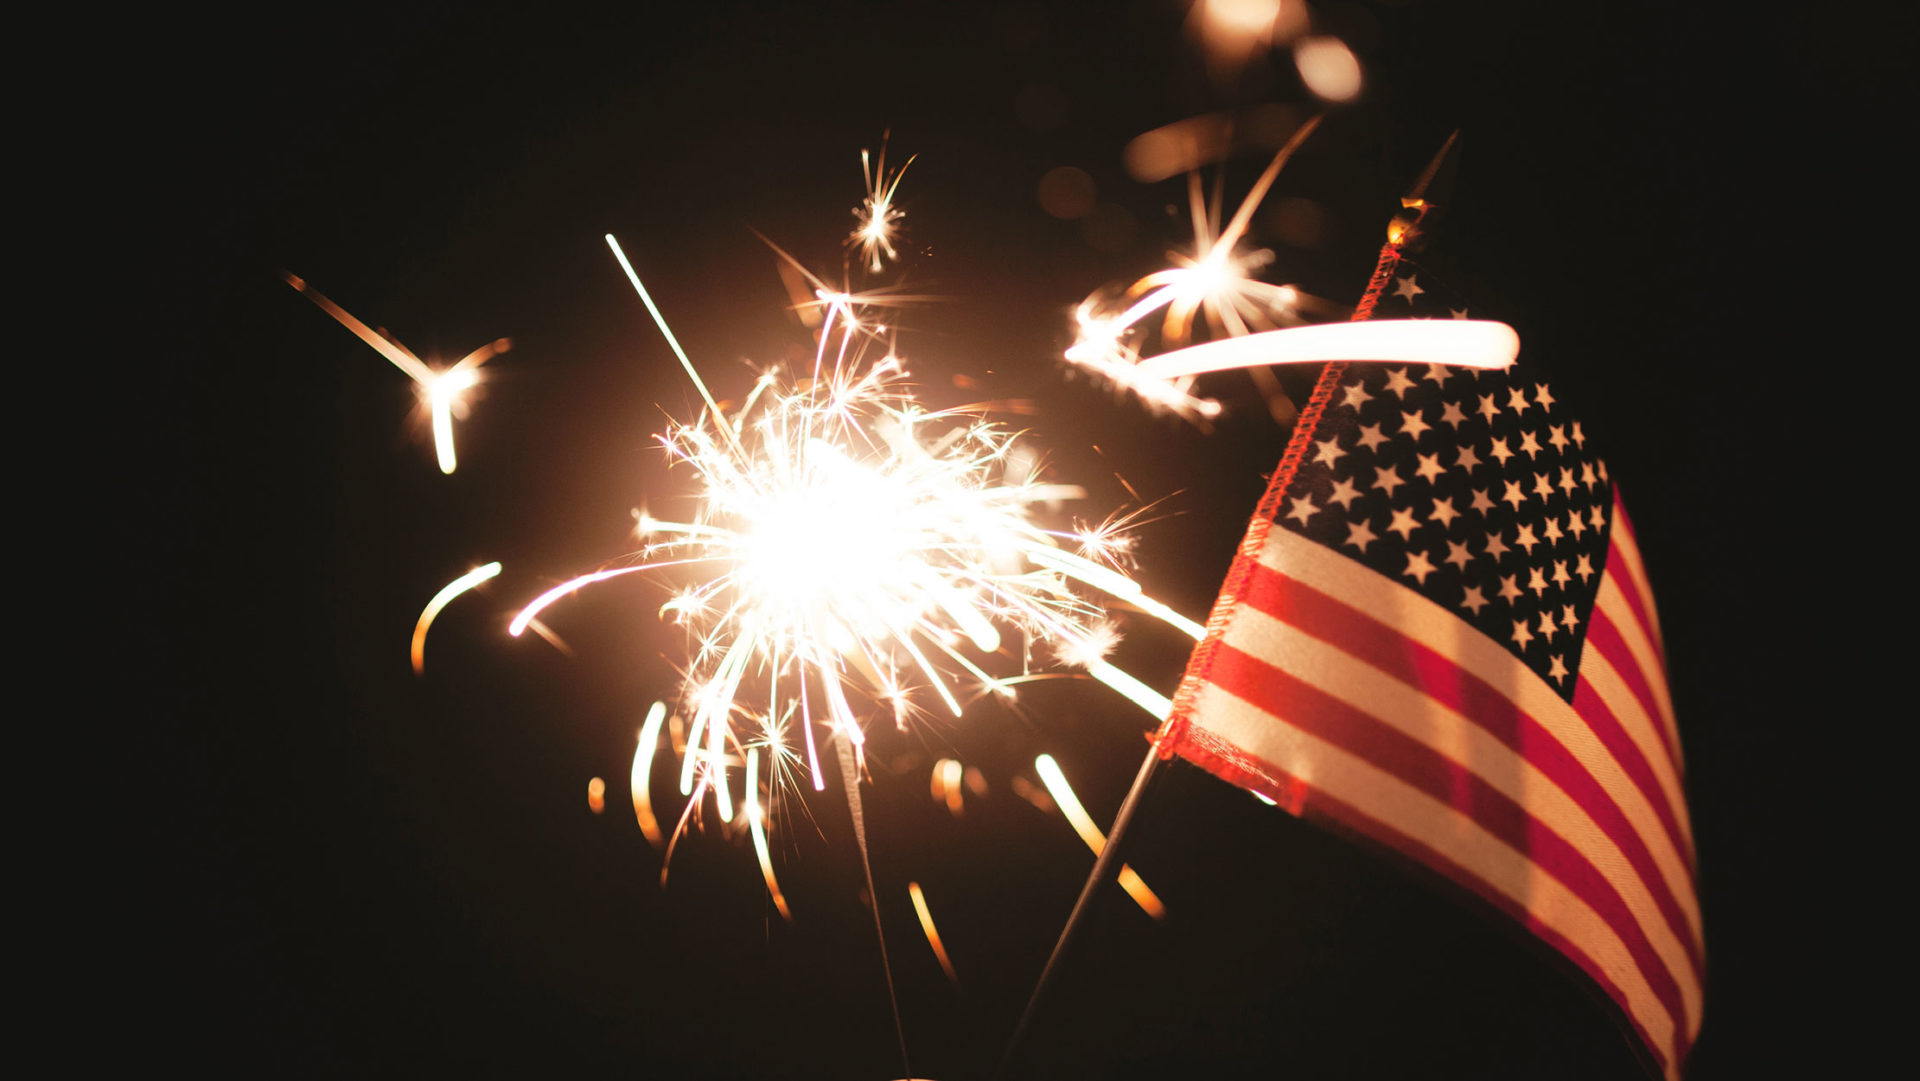 JES Holdings and our family of companies would like to wish a happy and safe Fourth of July to all of our employees, residents, families and friends!